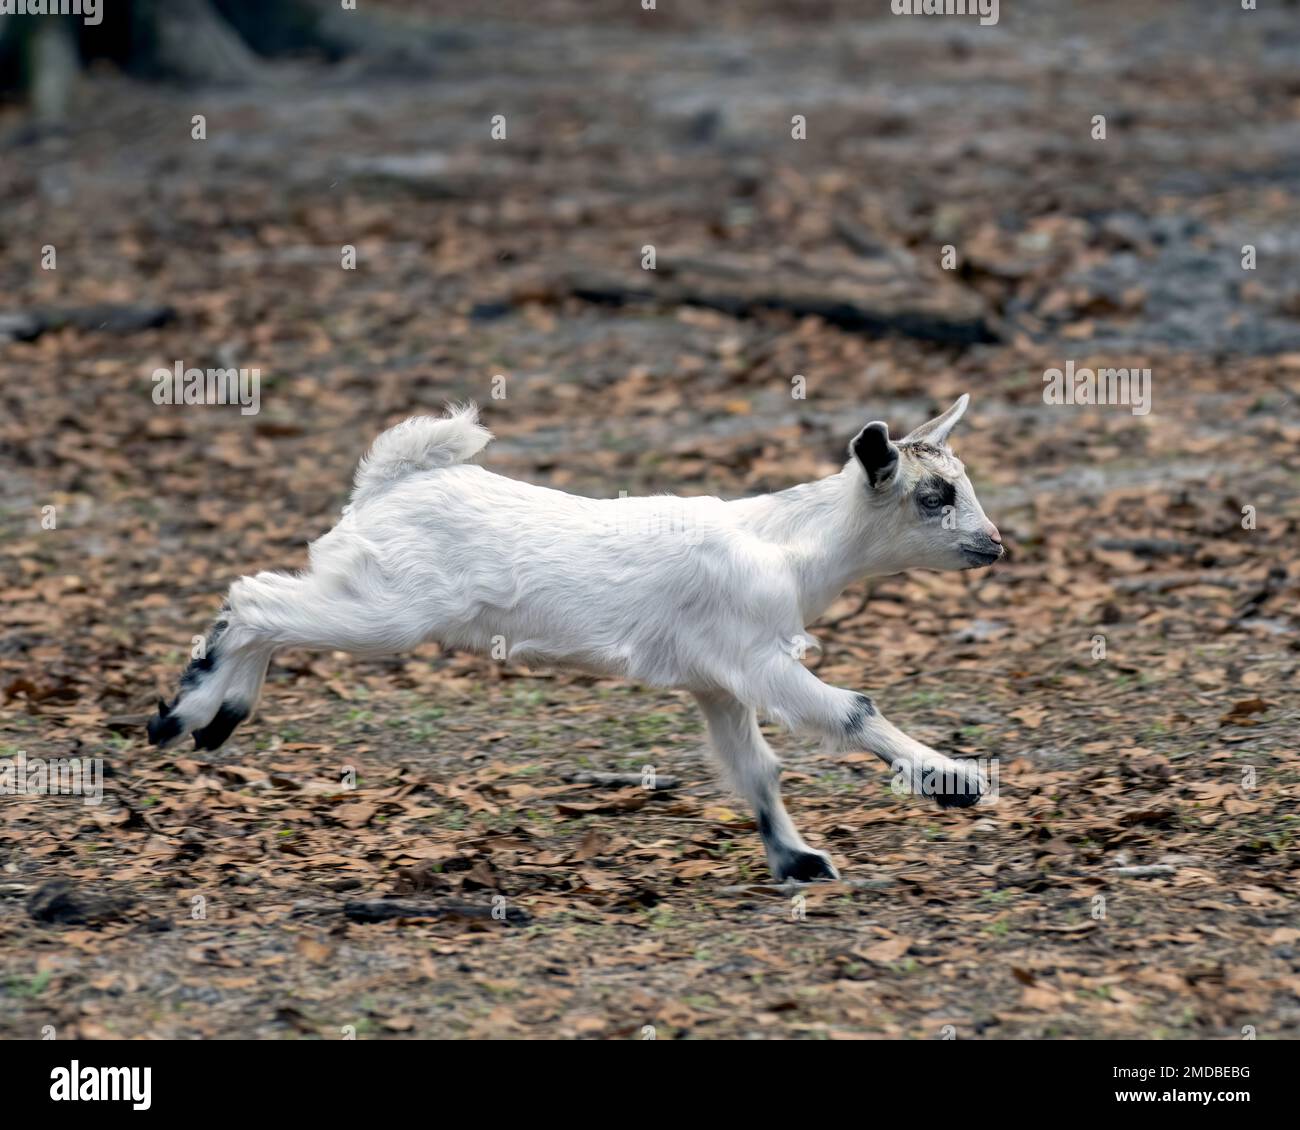 a white baby goat running through a field Stock Photo